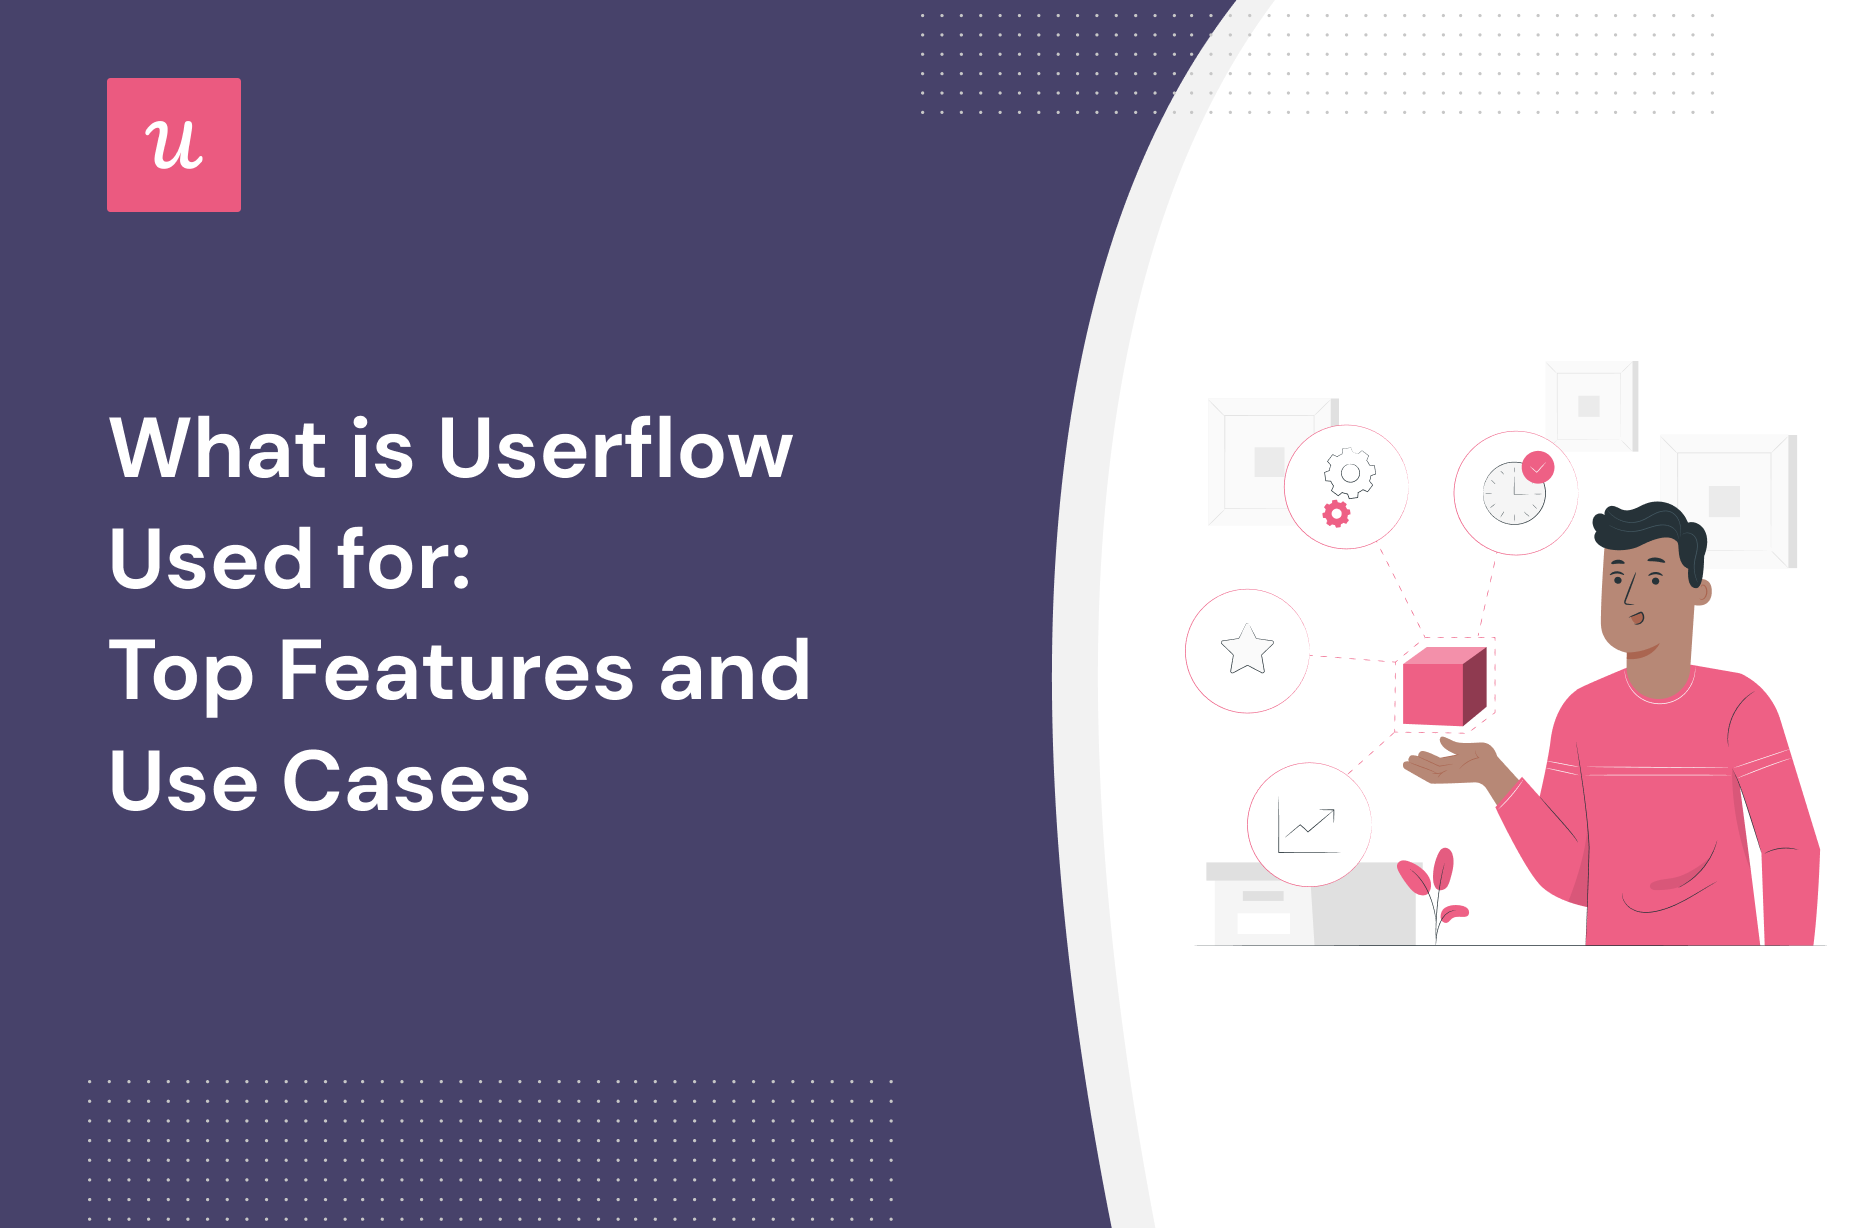 What is Userflow Used for: Top Features and Use Cases